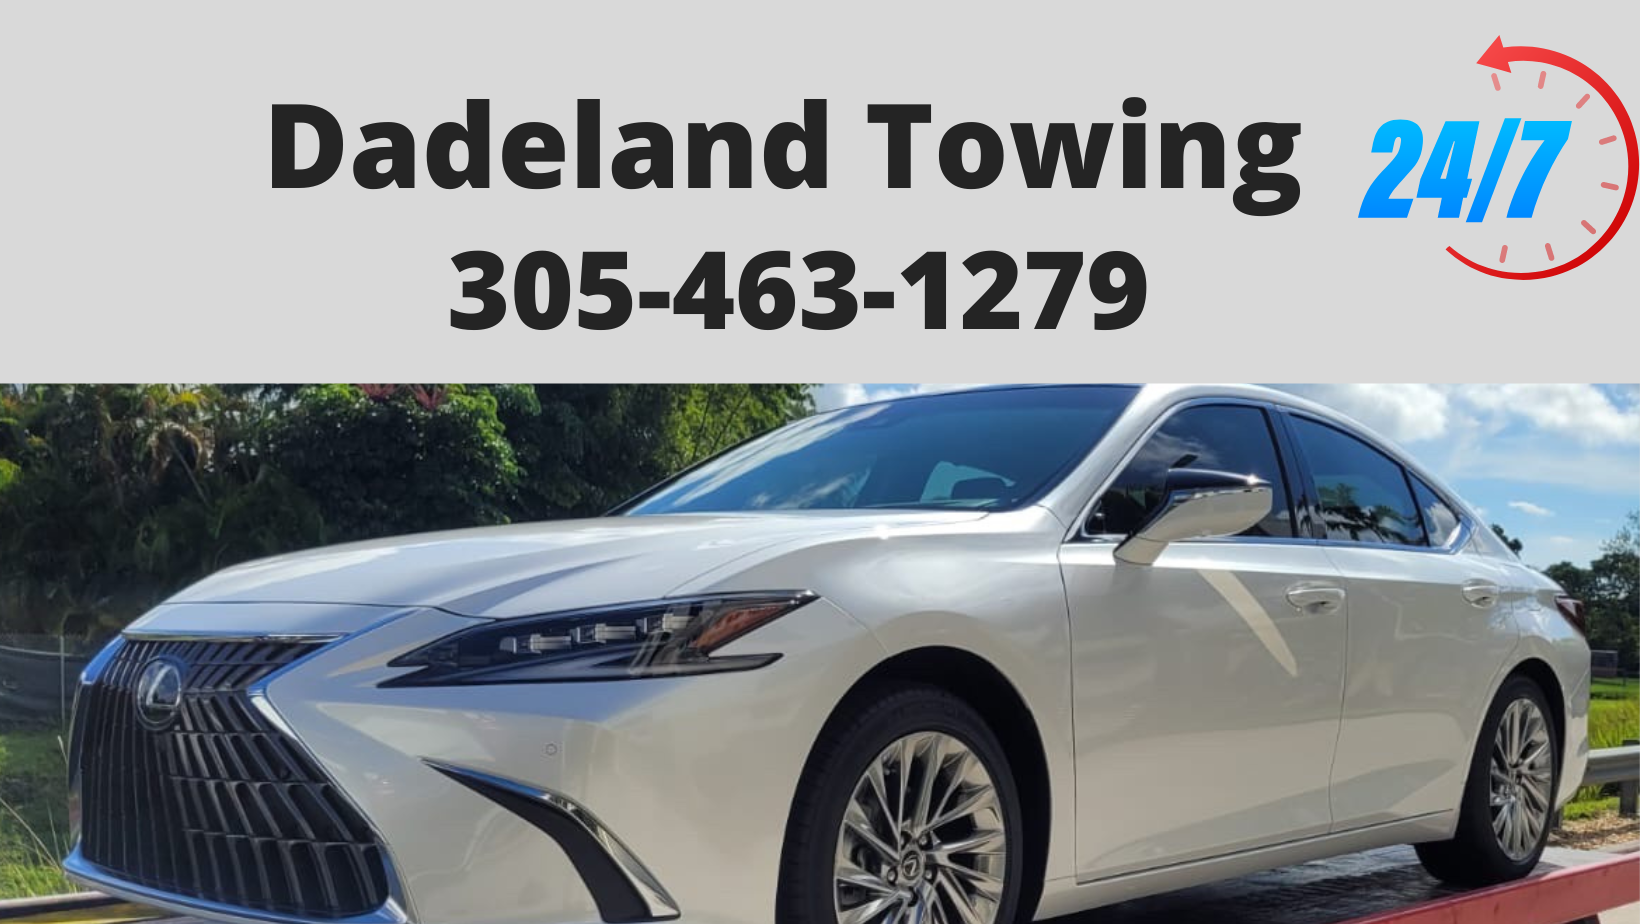 Dadeland Towing Towing.com Profile Banner